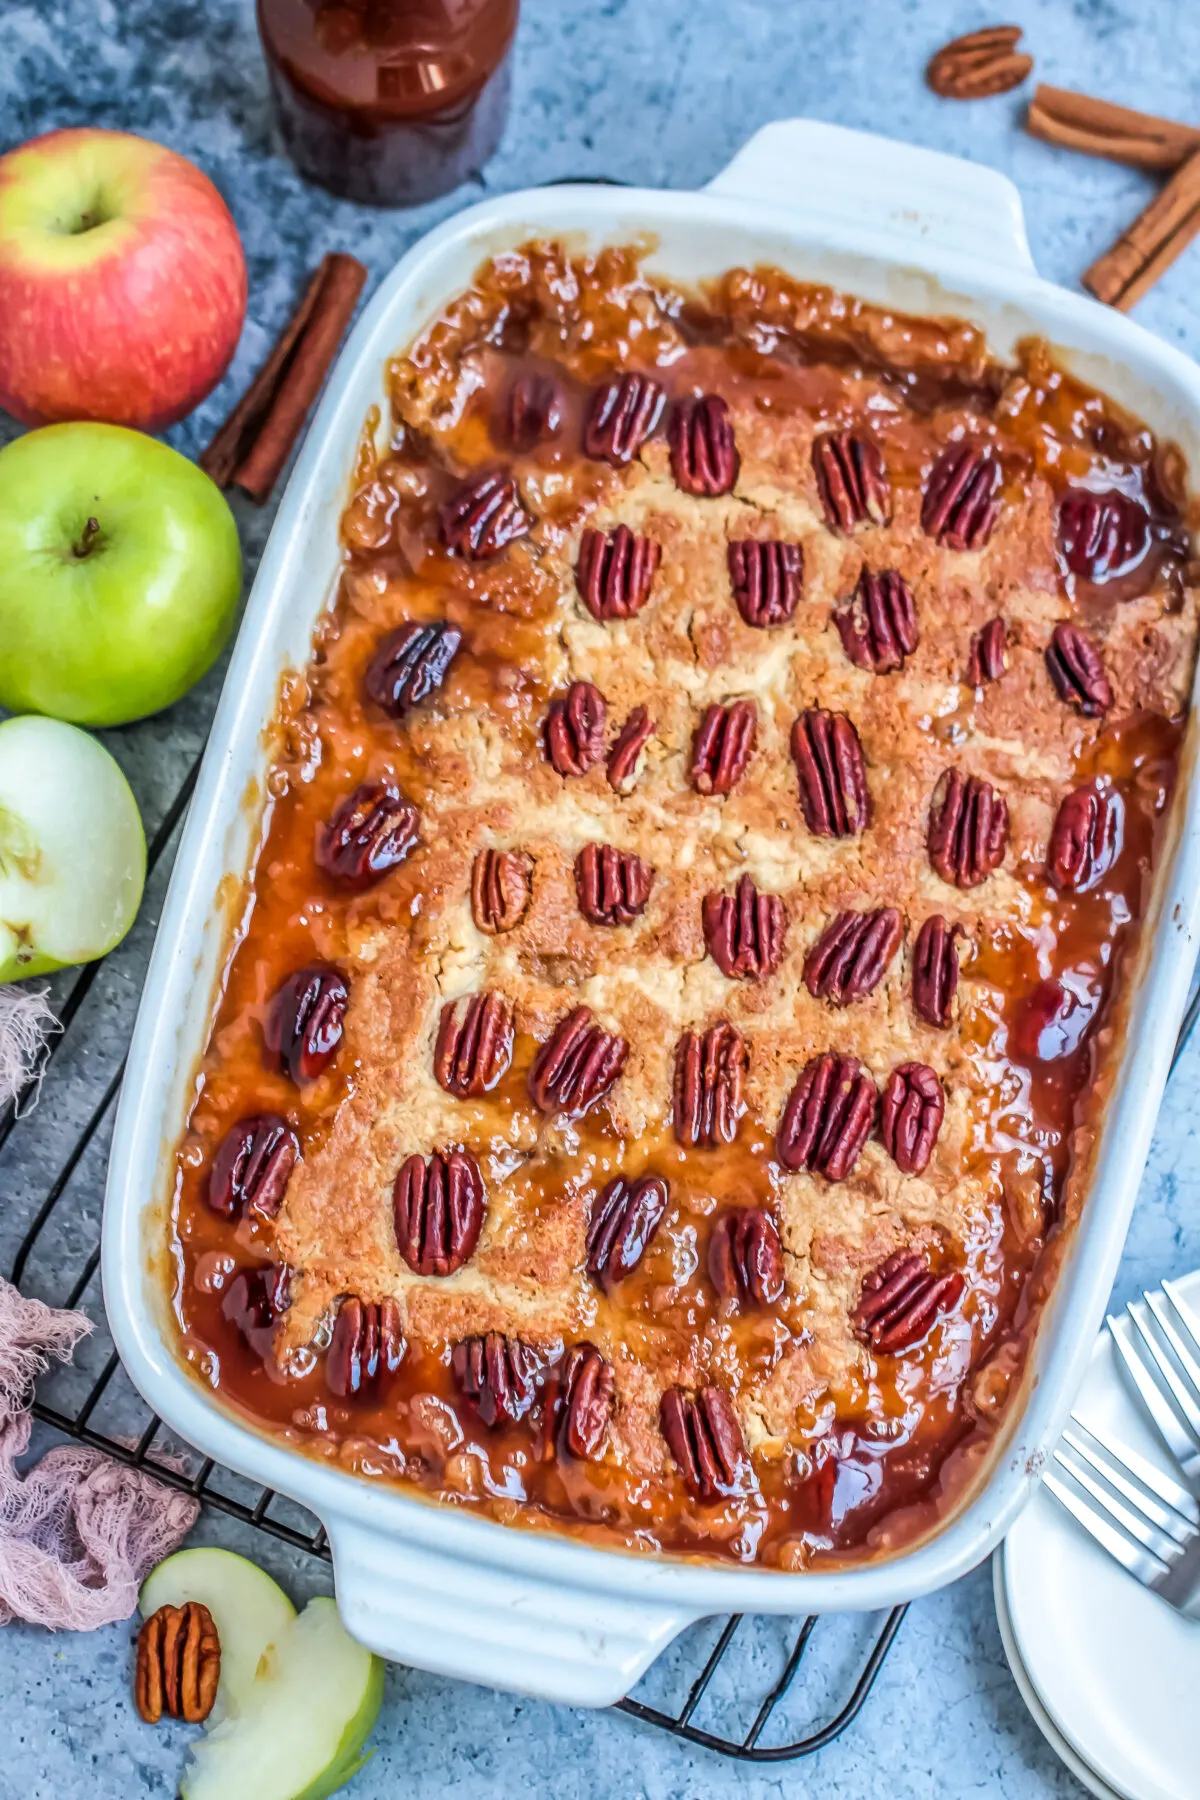 A delicious apple dump cake recipe that is easy to prepare and makes a great fall dessert served warm with ice cream and caramel sauce!